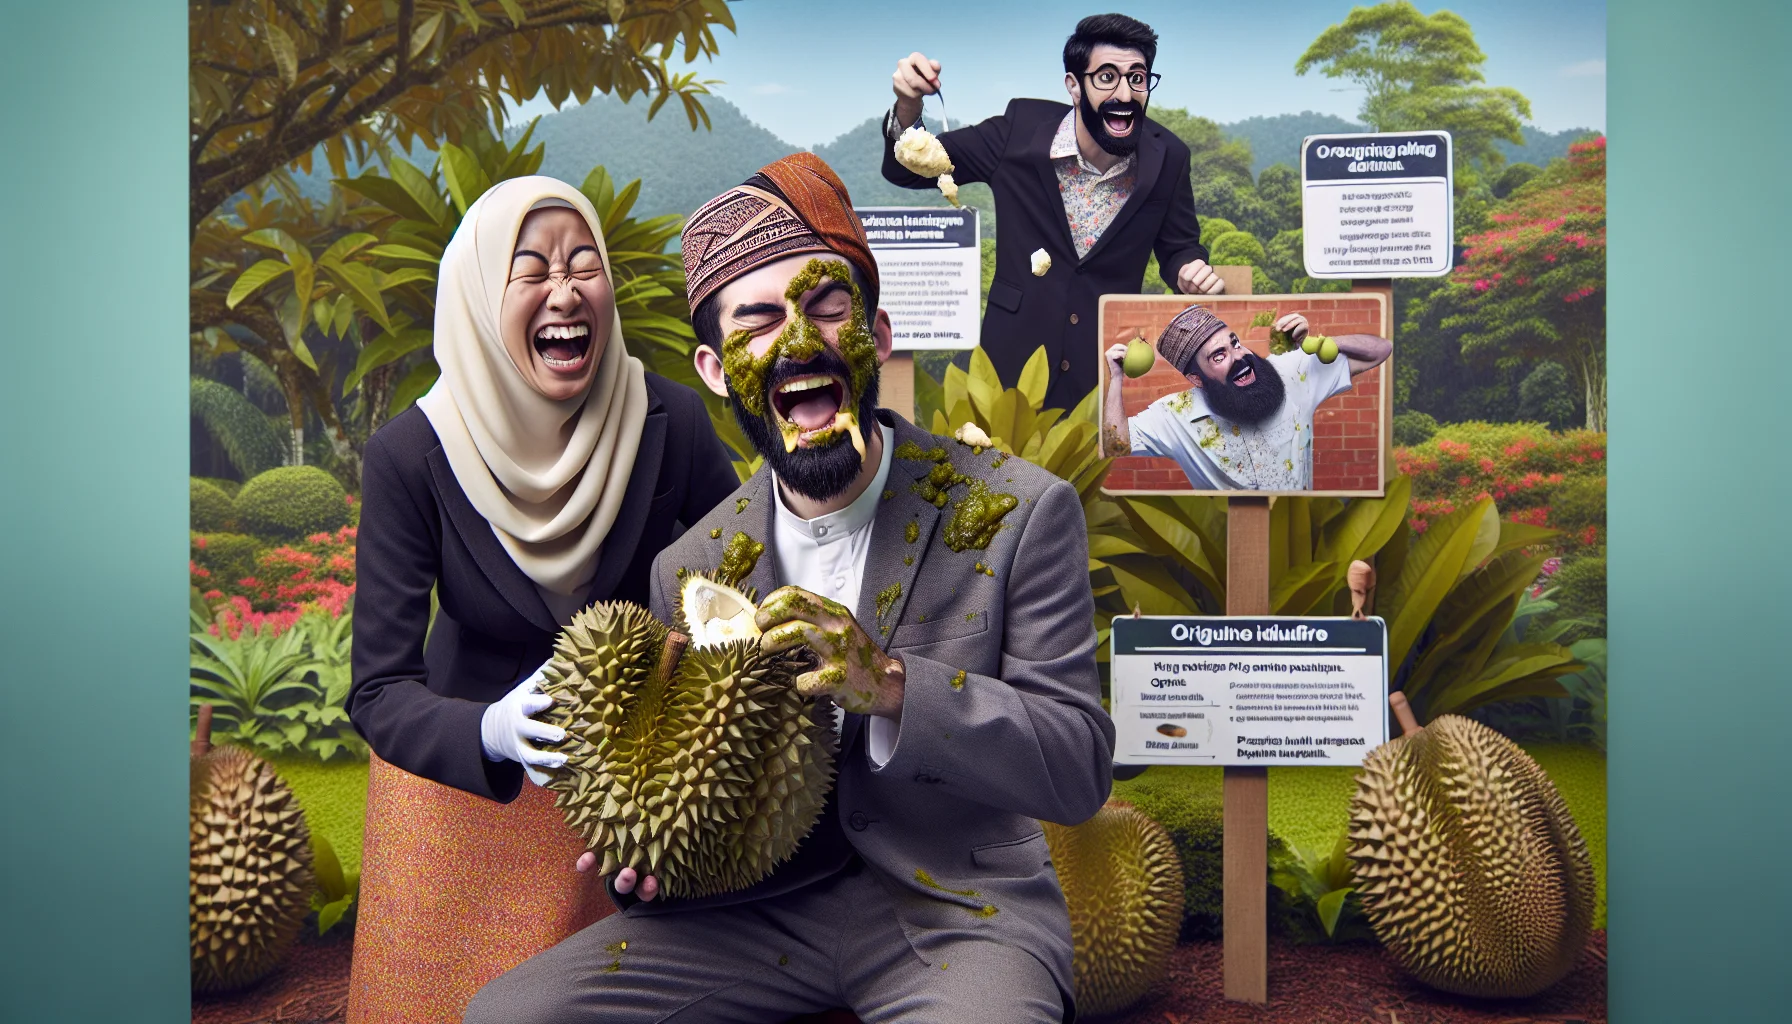 Imagine a humorous and engaging scene set in a lush garden. A Middle Eastern woman and a Caucasian man are laughing as they try to open a large stinky durian fruit and the man seems to have gotten it all over his face. Their expressions are playful and full of mirth. There are signs posted in the garden displaying the benefits of planting and eating durians such as its high nutritional value and potential health benefits. The scene aims to entice onlookers to take up gardening and enjoy the quirky advantages of nature's bounties.